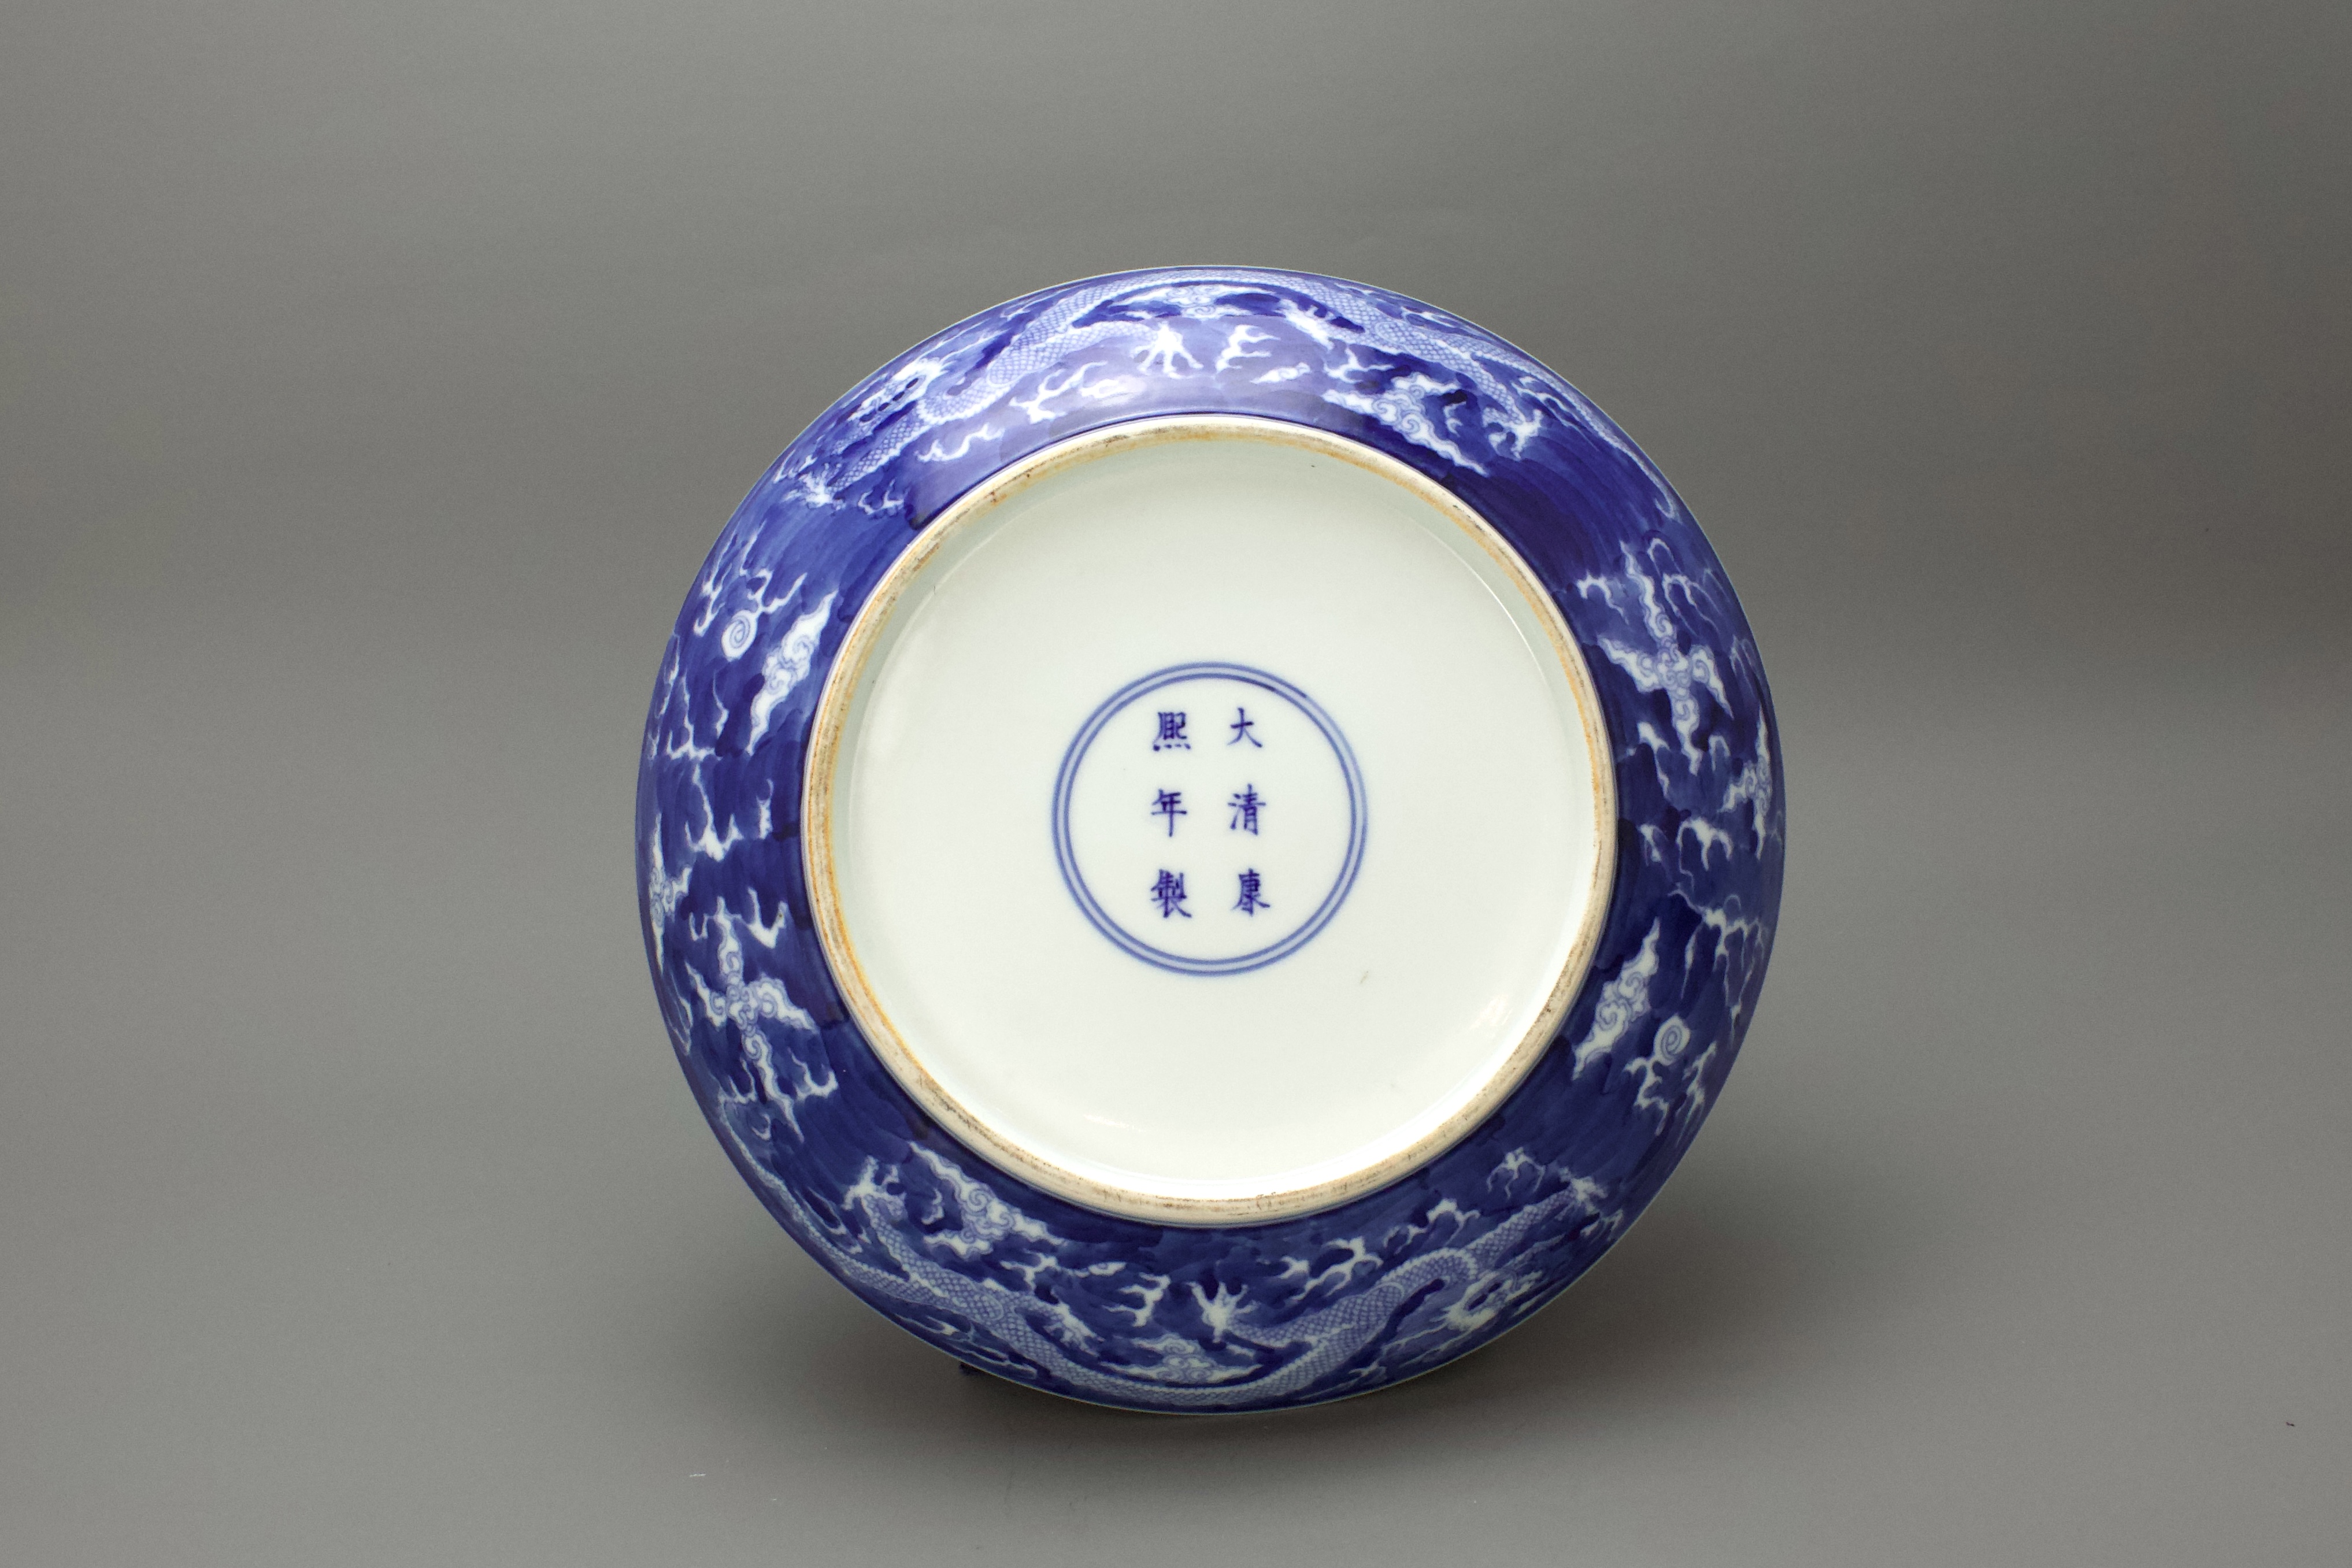 A Blue and White Dragon Dish, six character mark of Kangxi W:24.5cm decorated with dragons - Image 4 of 4